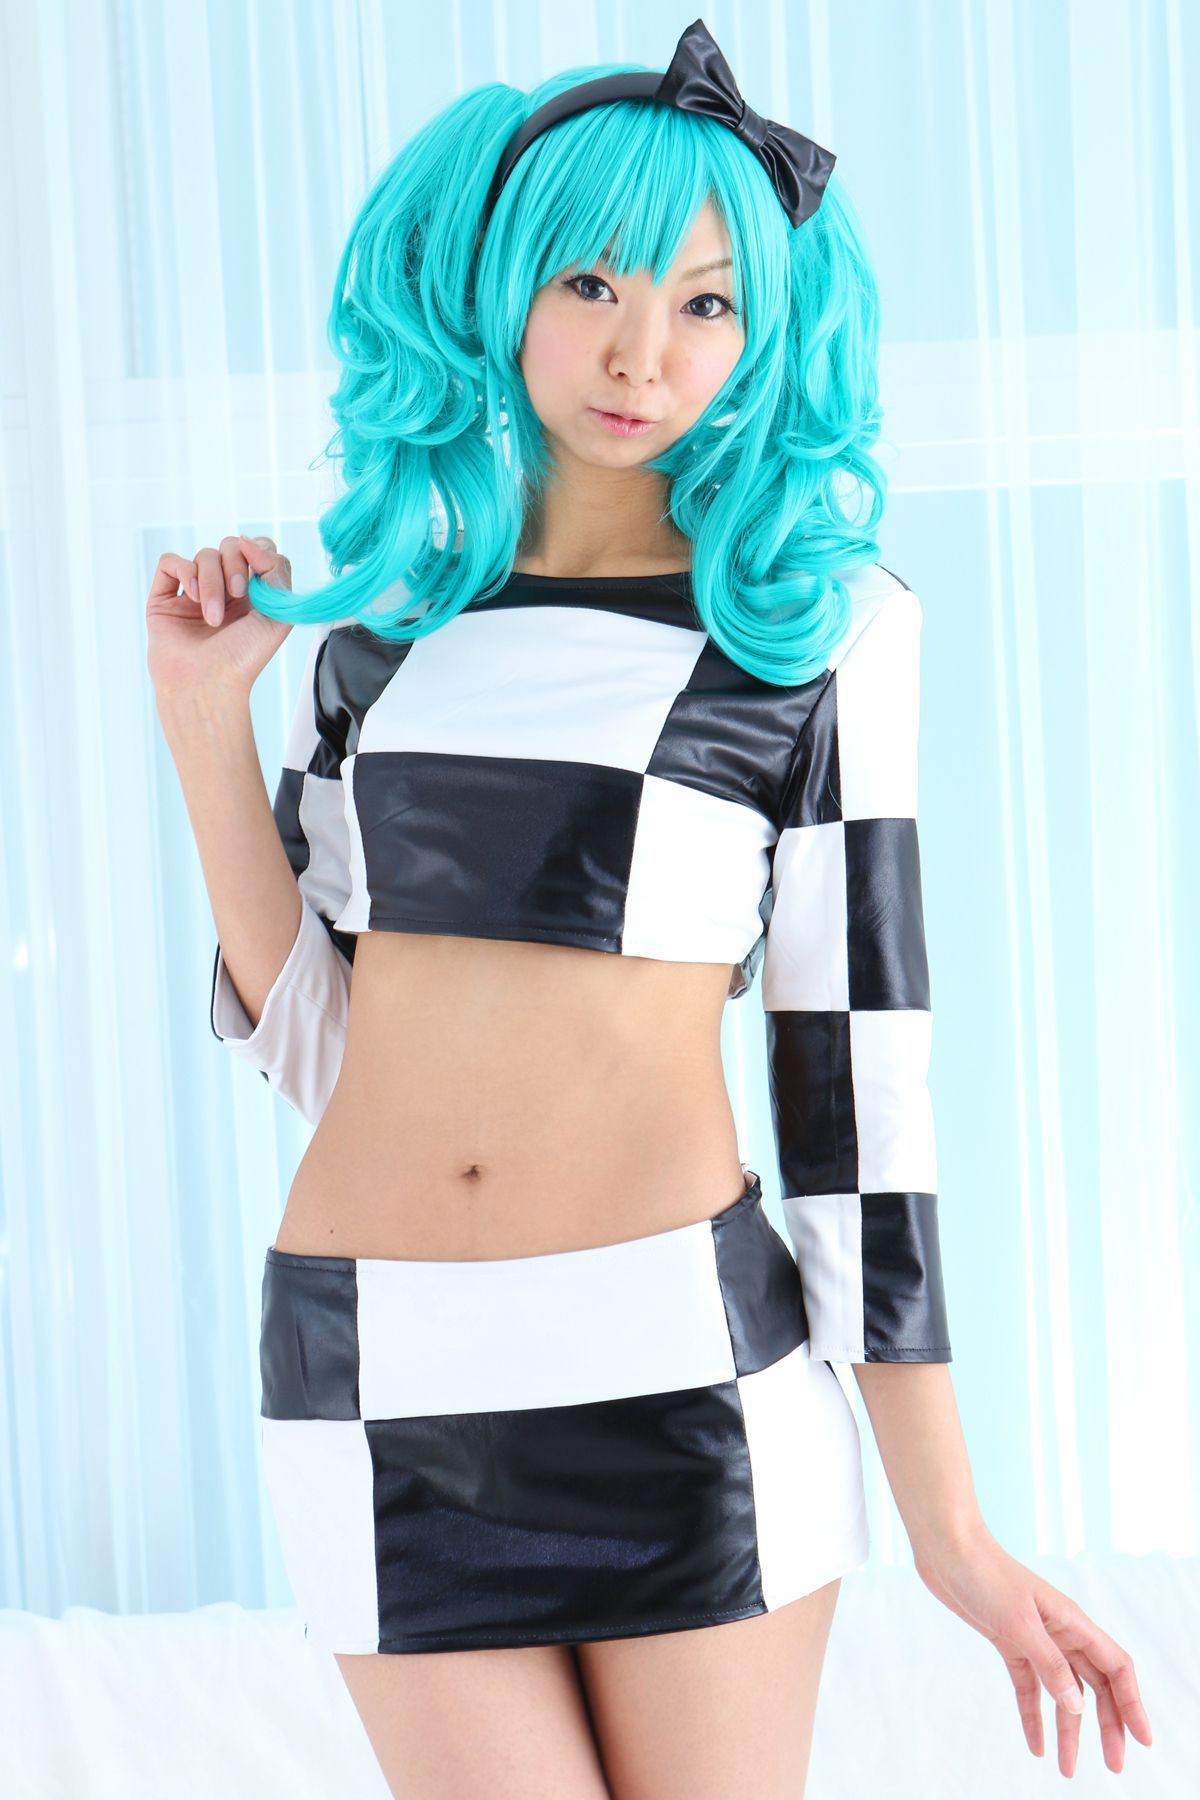 taotuhome[Cosplay套图] New Hatsune Miku from Vocaloid - So Sexy第37张